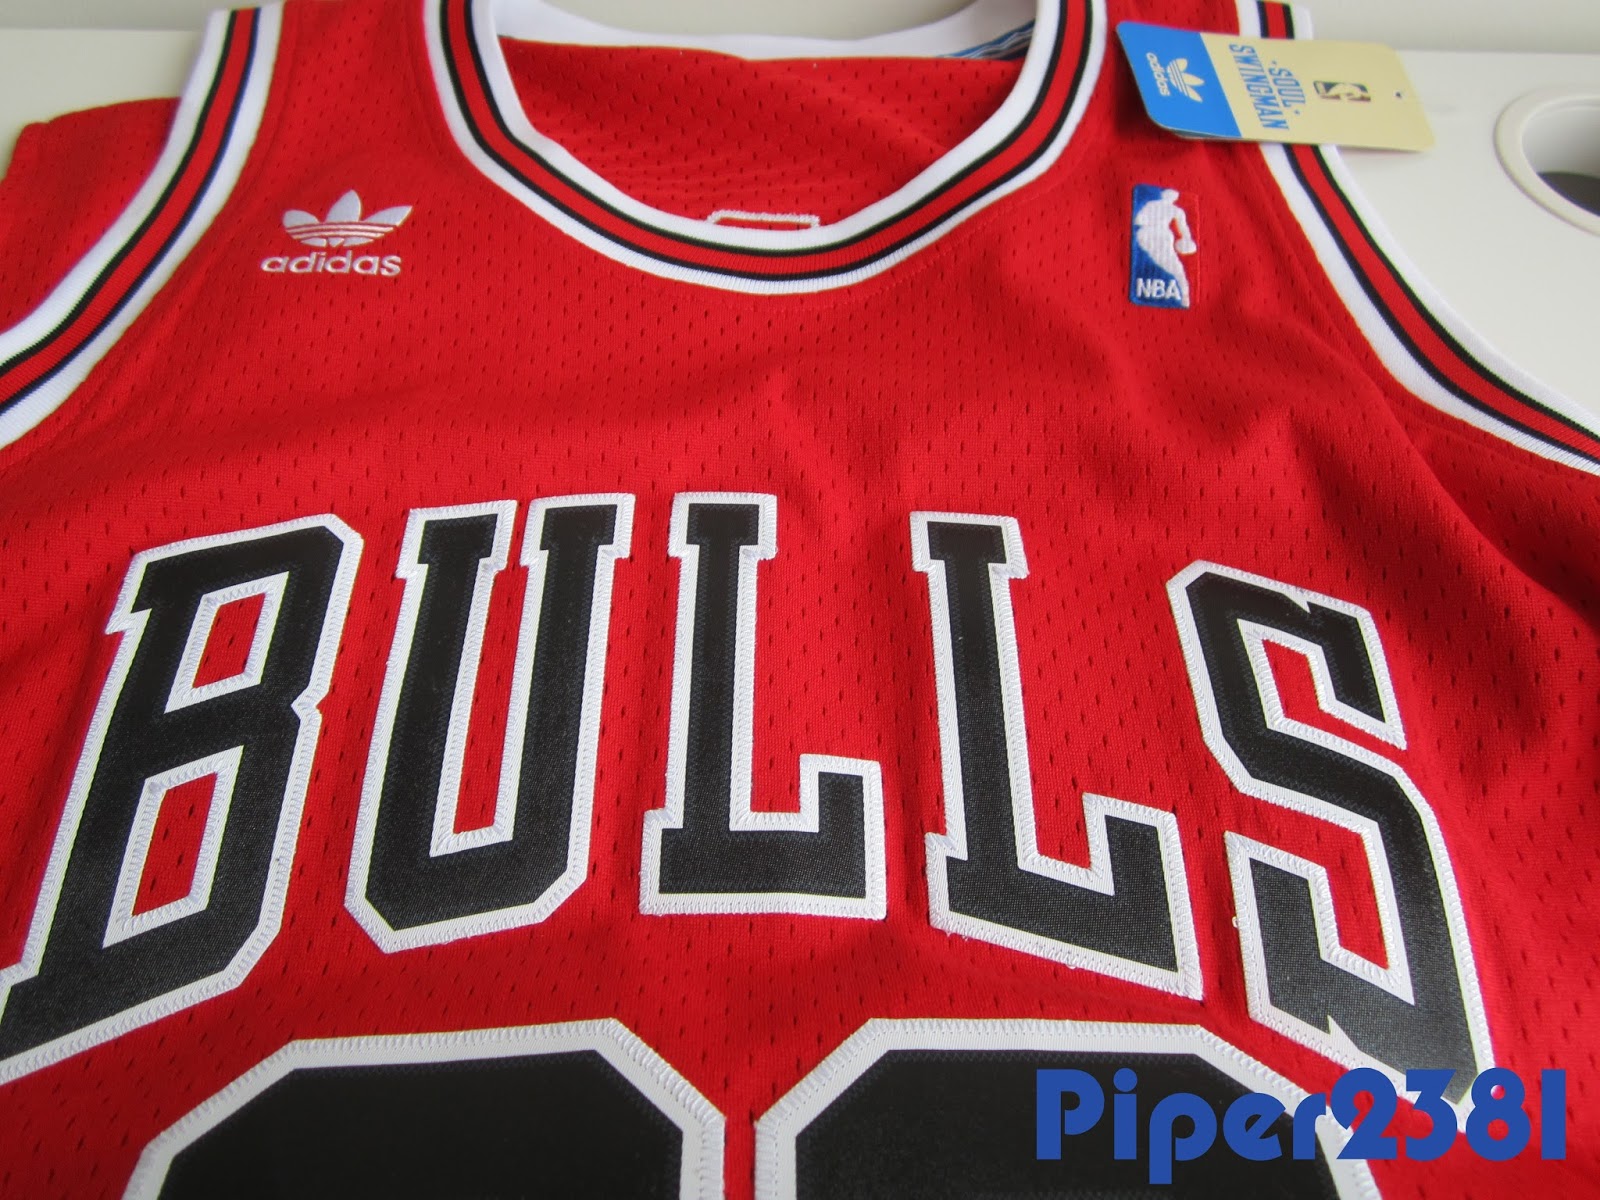 adidas pippen jersey